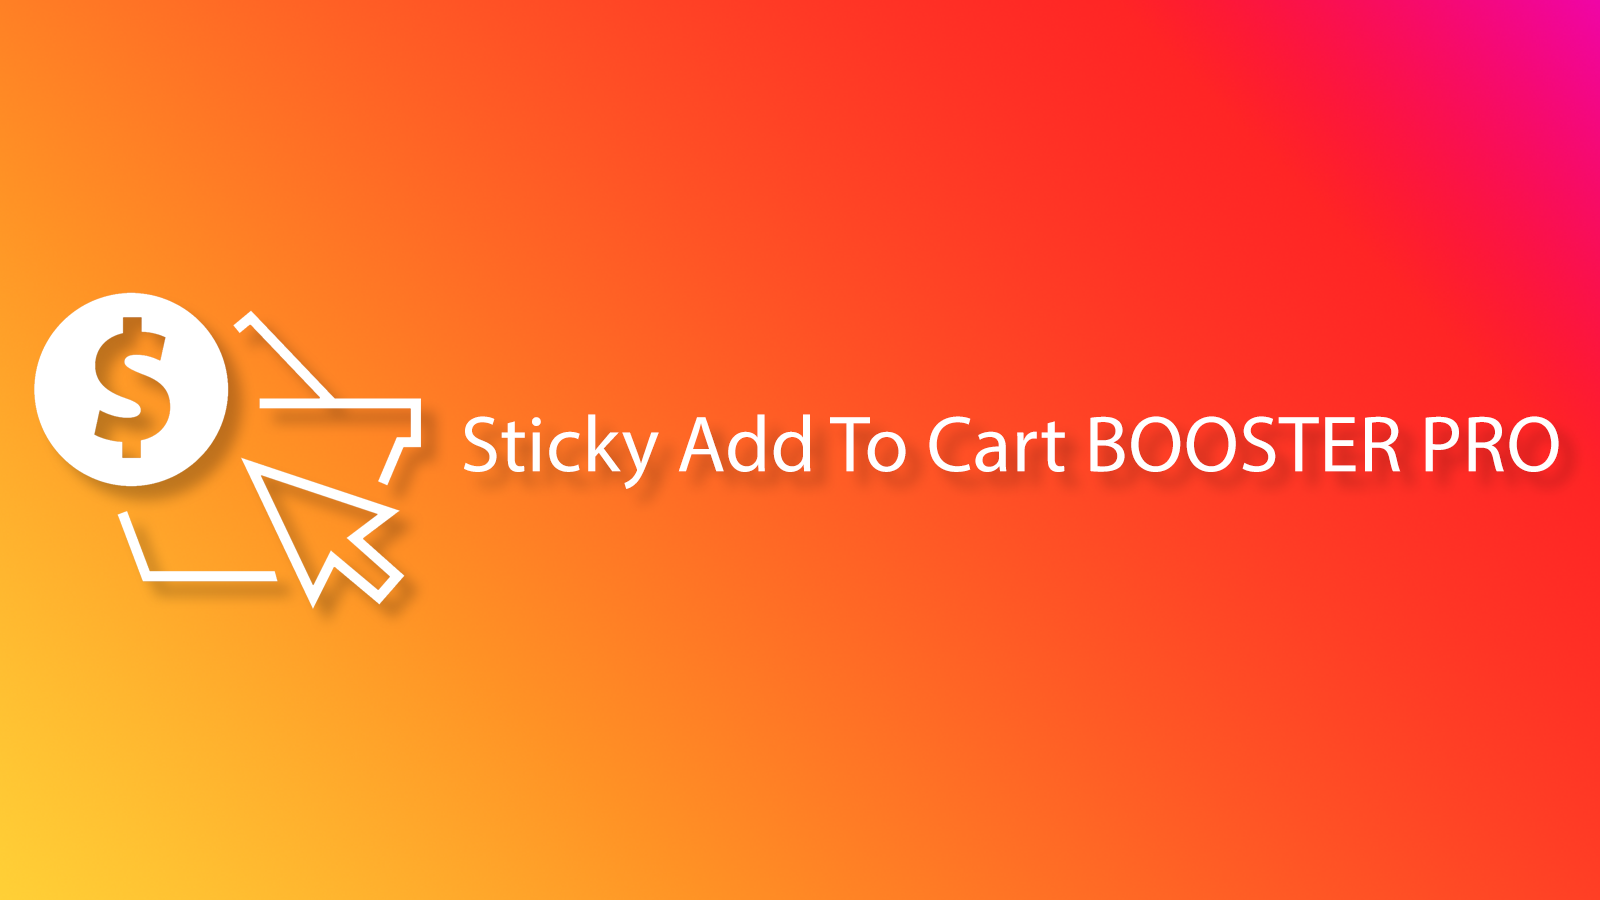 Sticky Add To Cart Booster Pro Ecommerce Plugins For Online Stores Shopify App Store